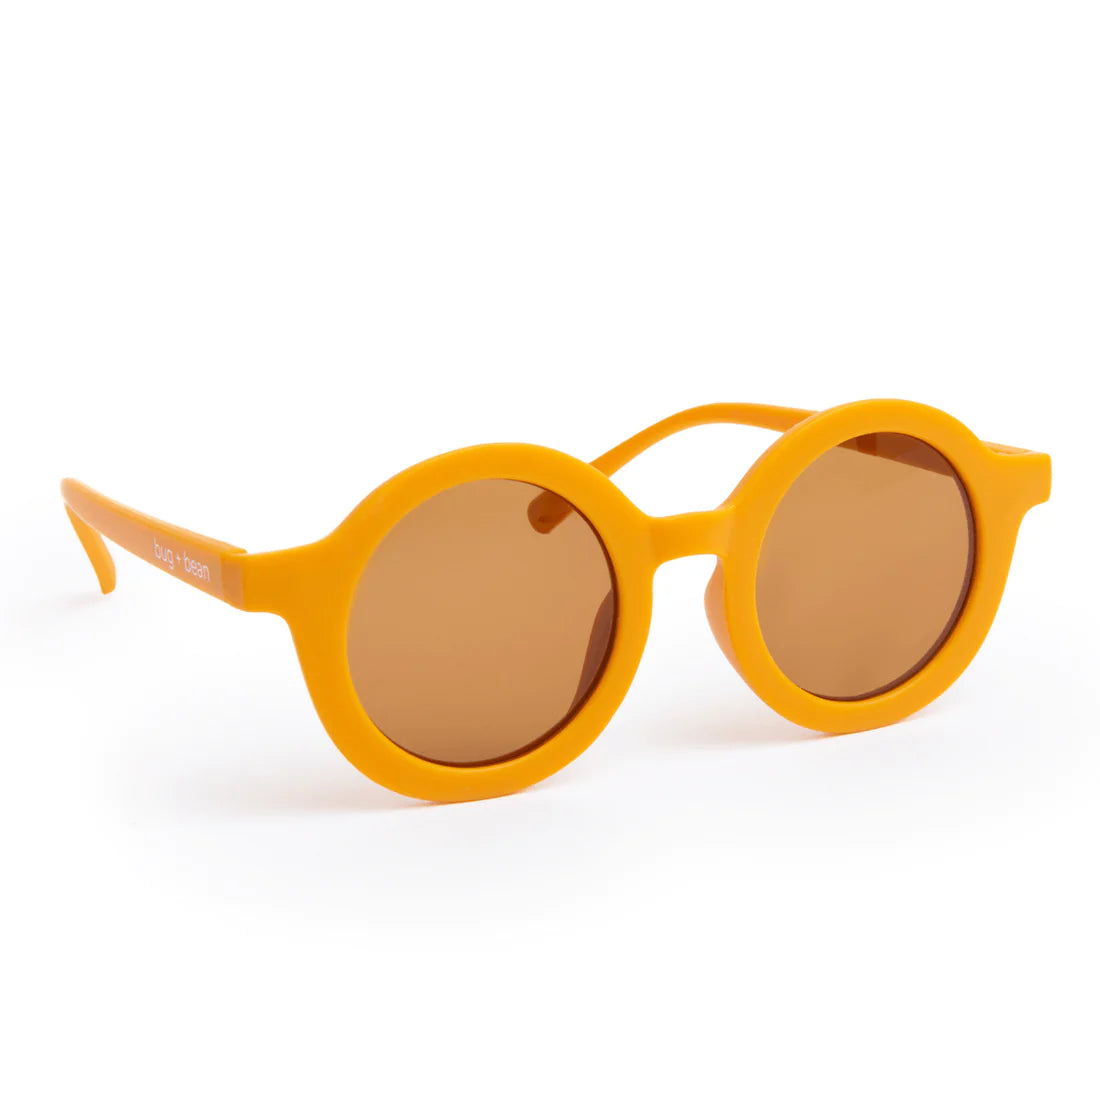 Kids Recycled Plastic Sunglasses in Mustard